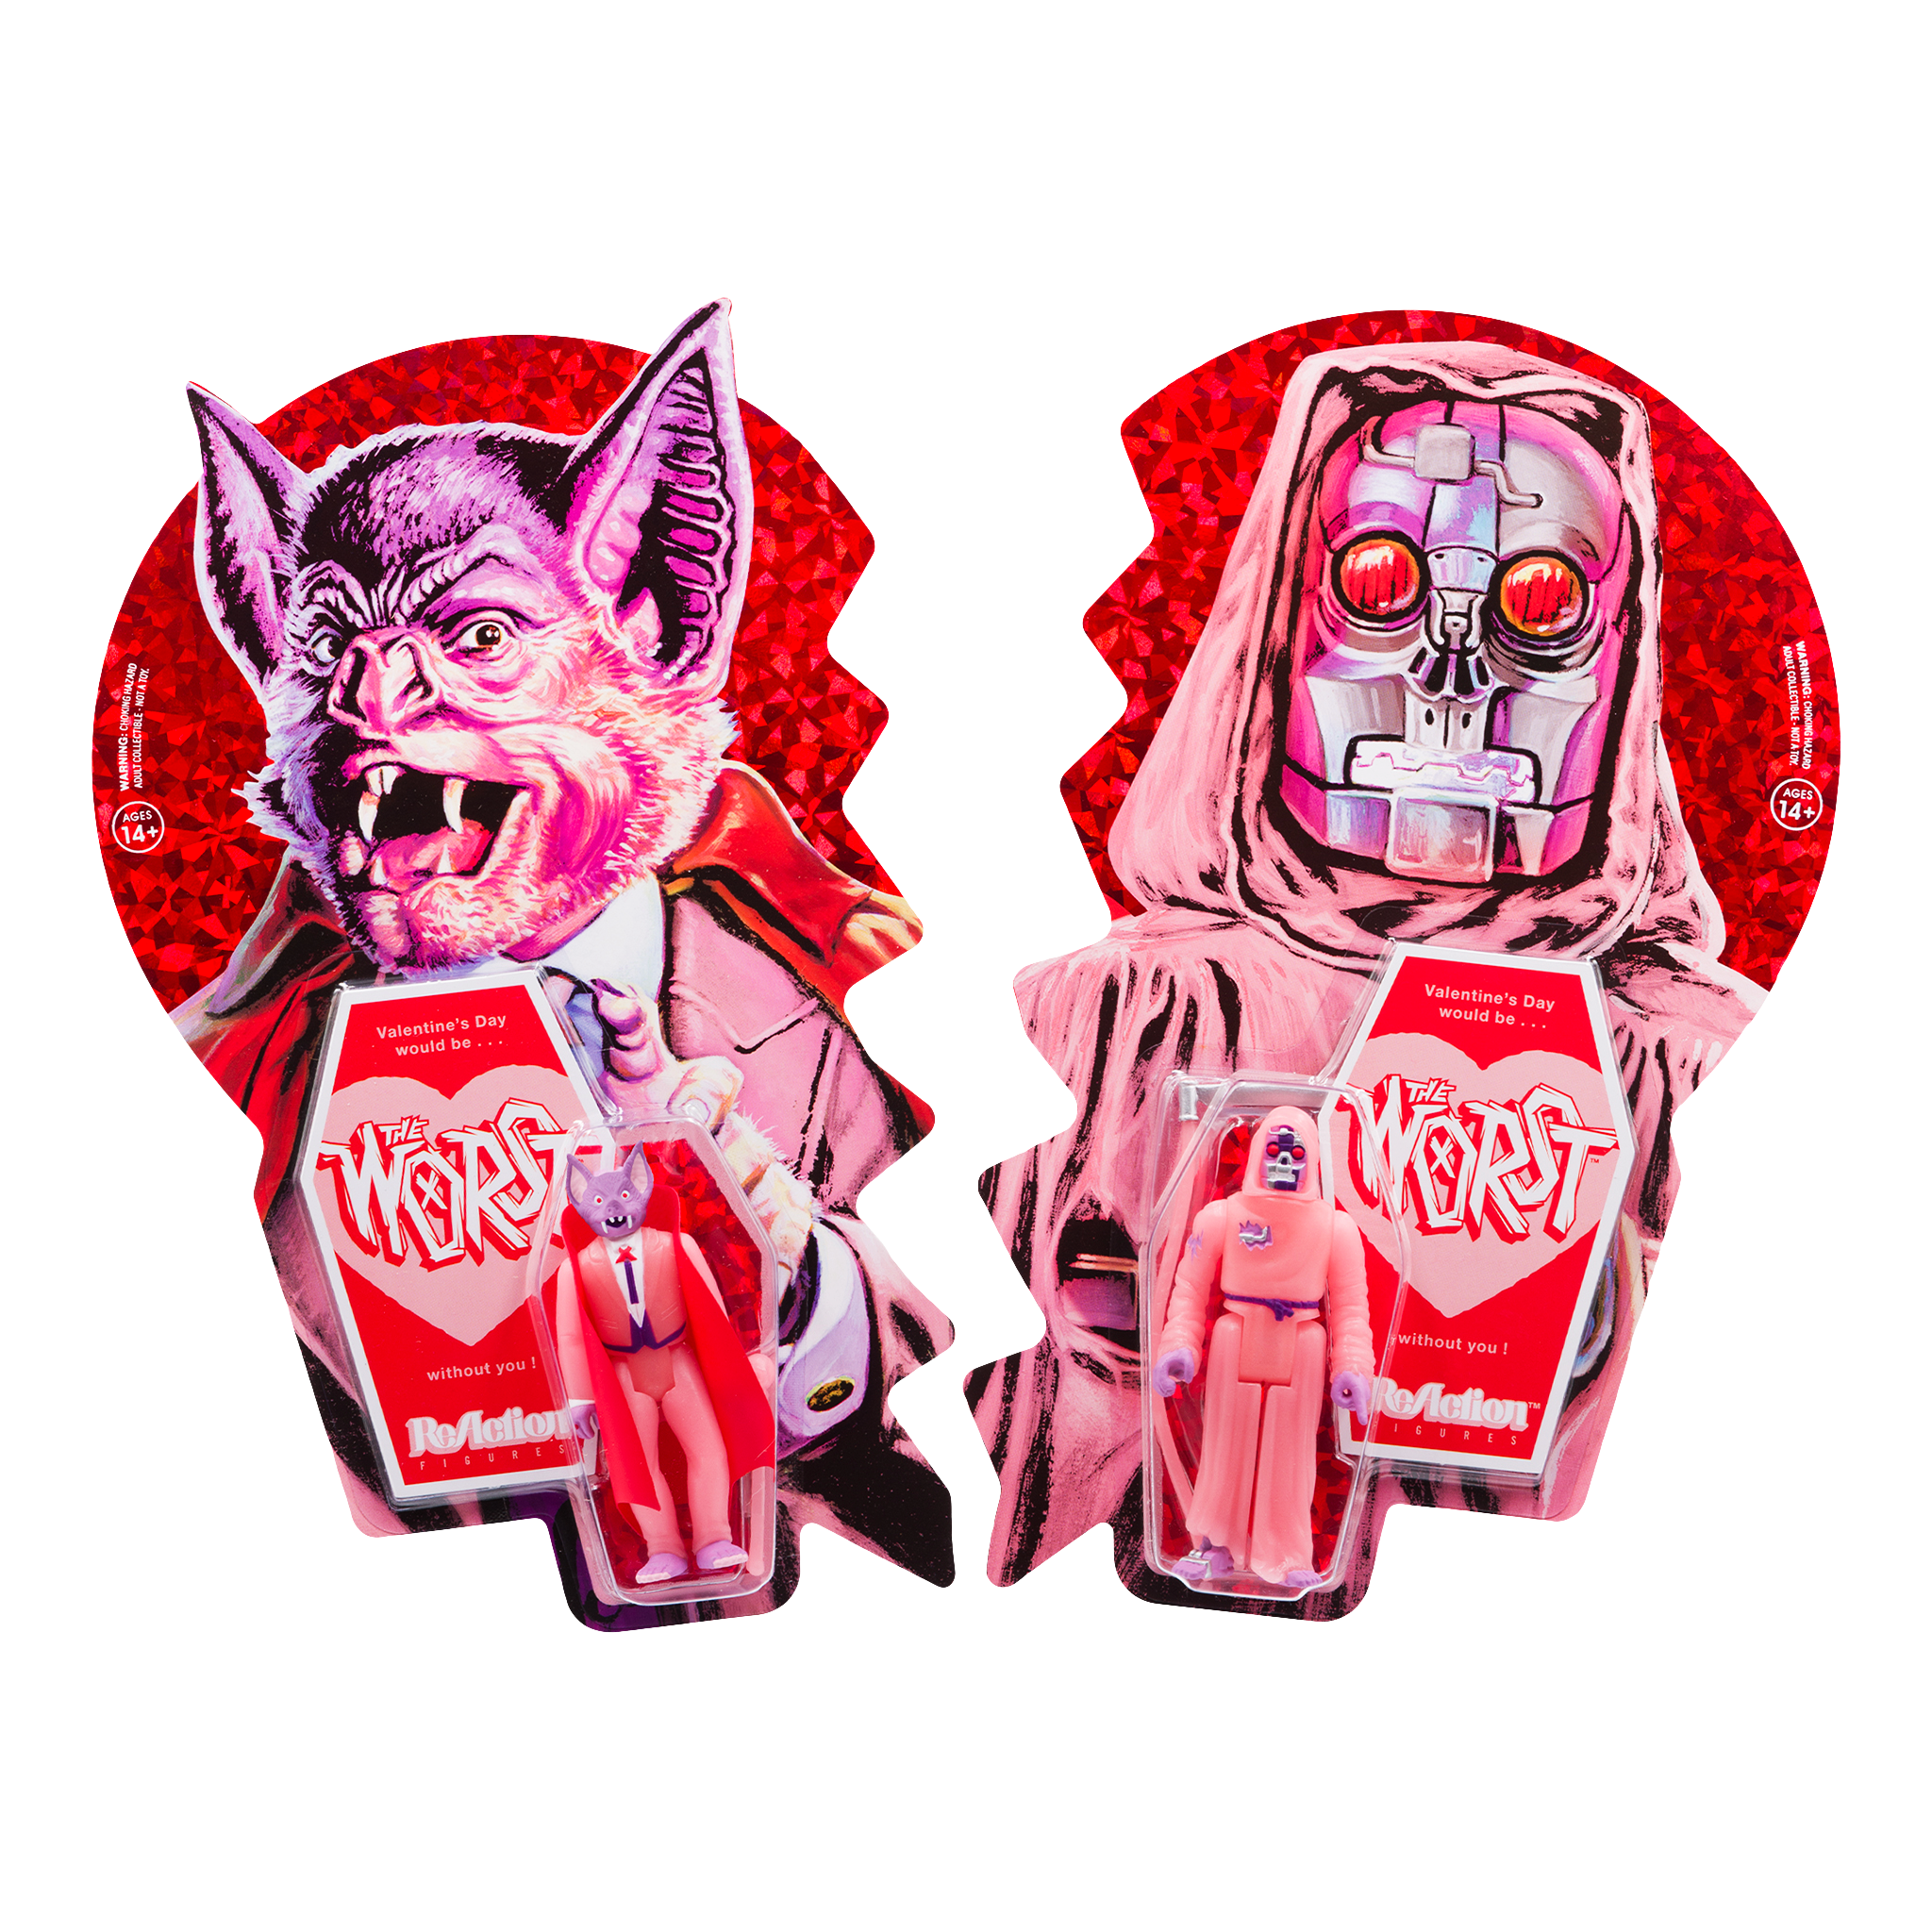 The Worst - Valentine's Day ReAction Figure 2-Pack - Batula and Robot Reaper